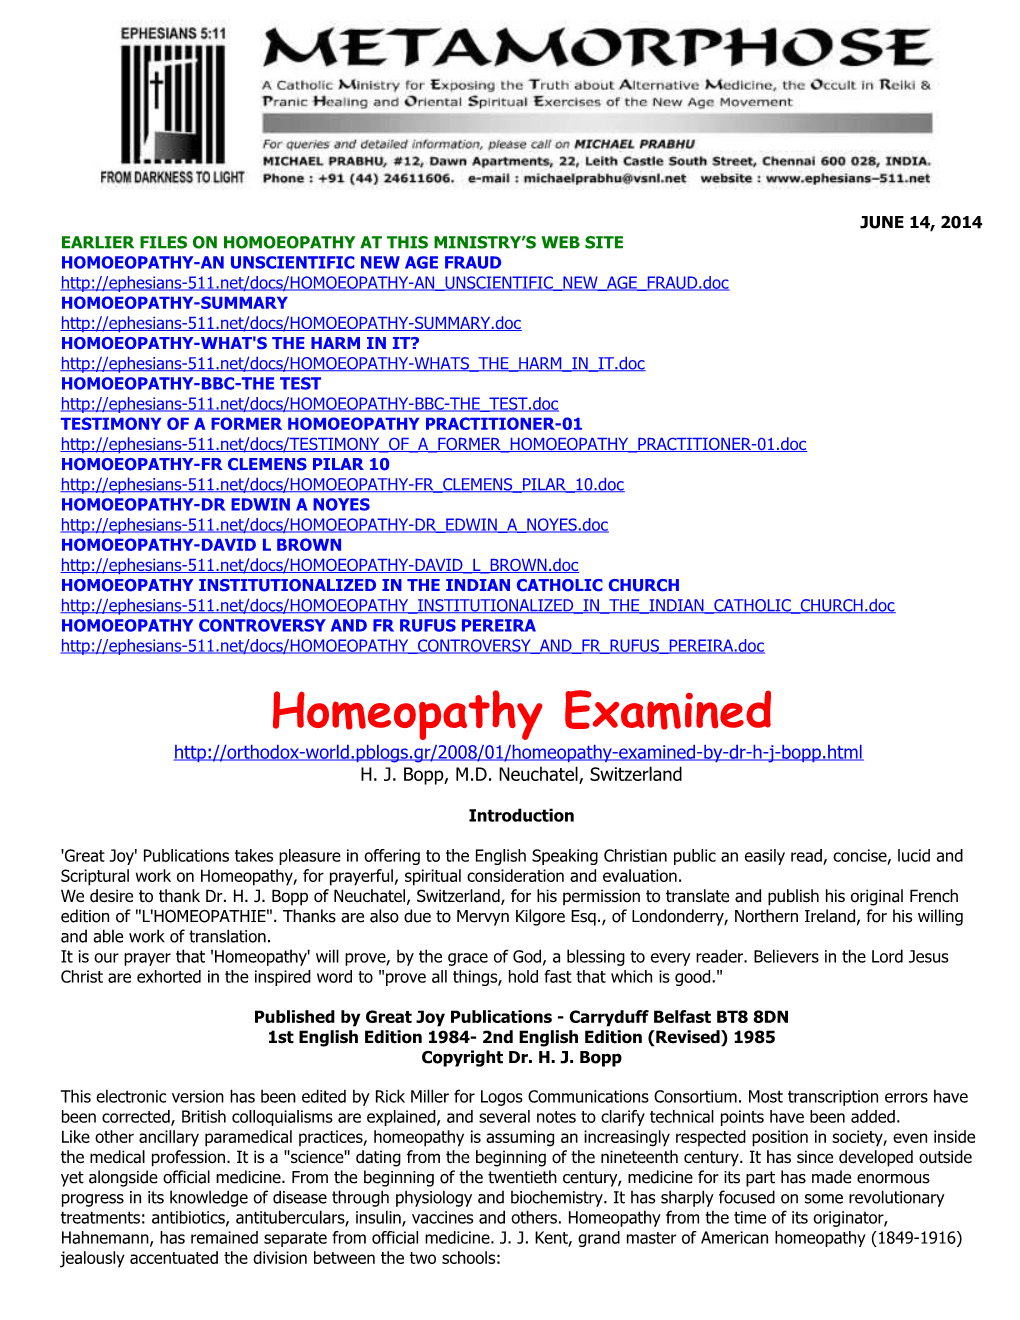 Earlier Files on Homoeopathy at This Ministry S Web Site